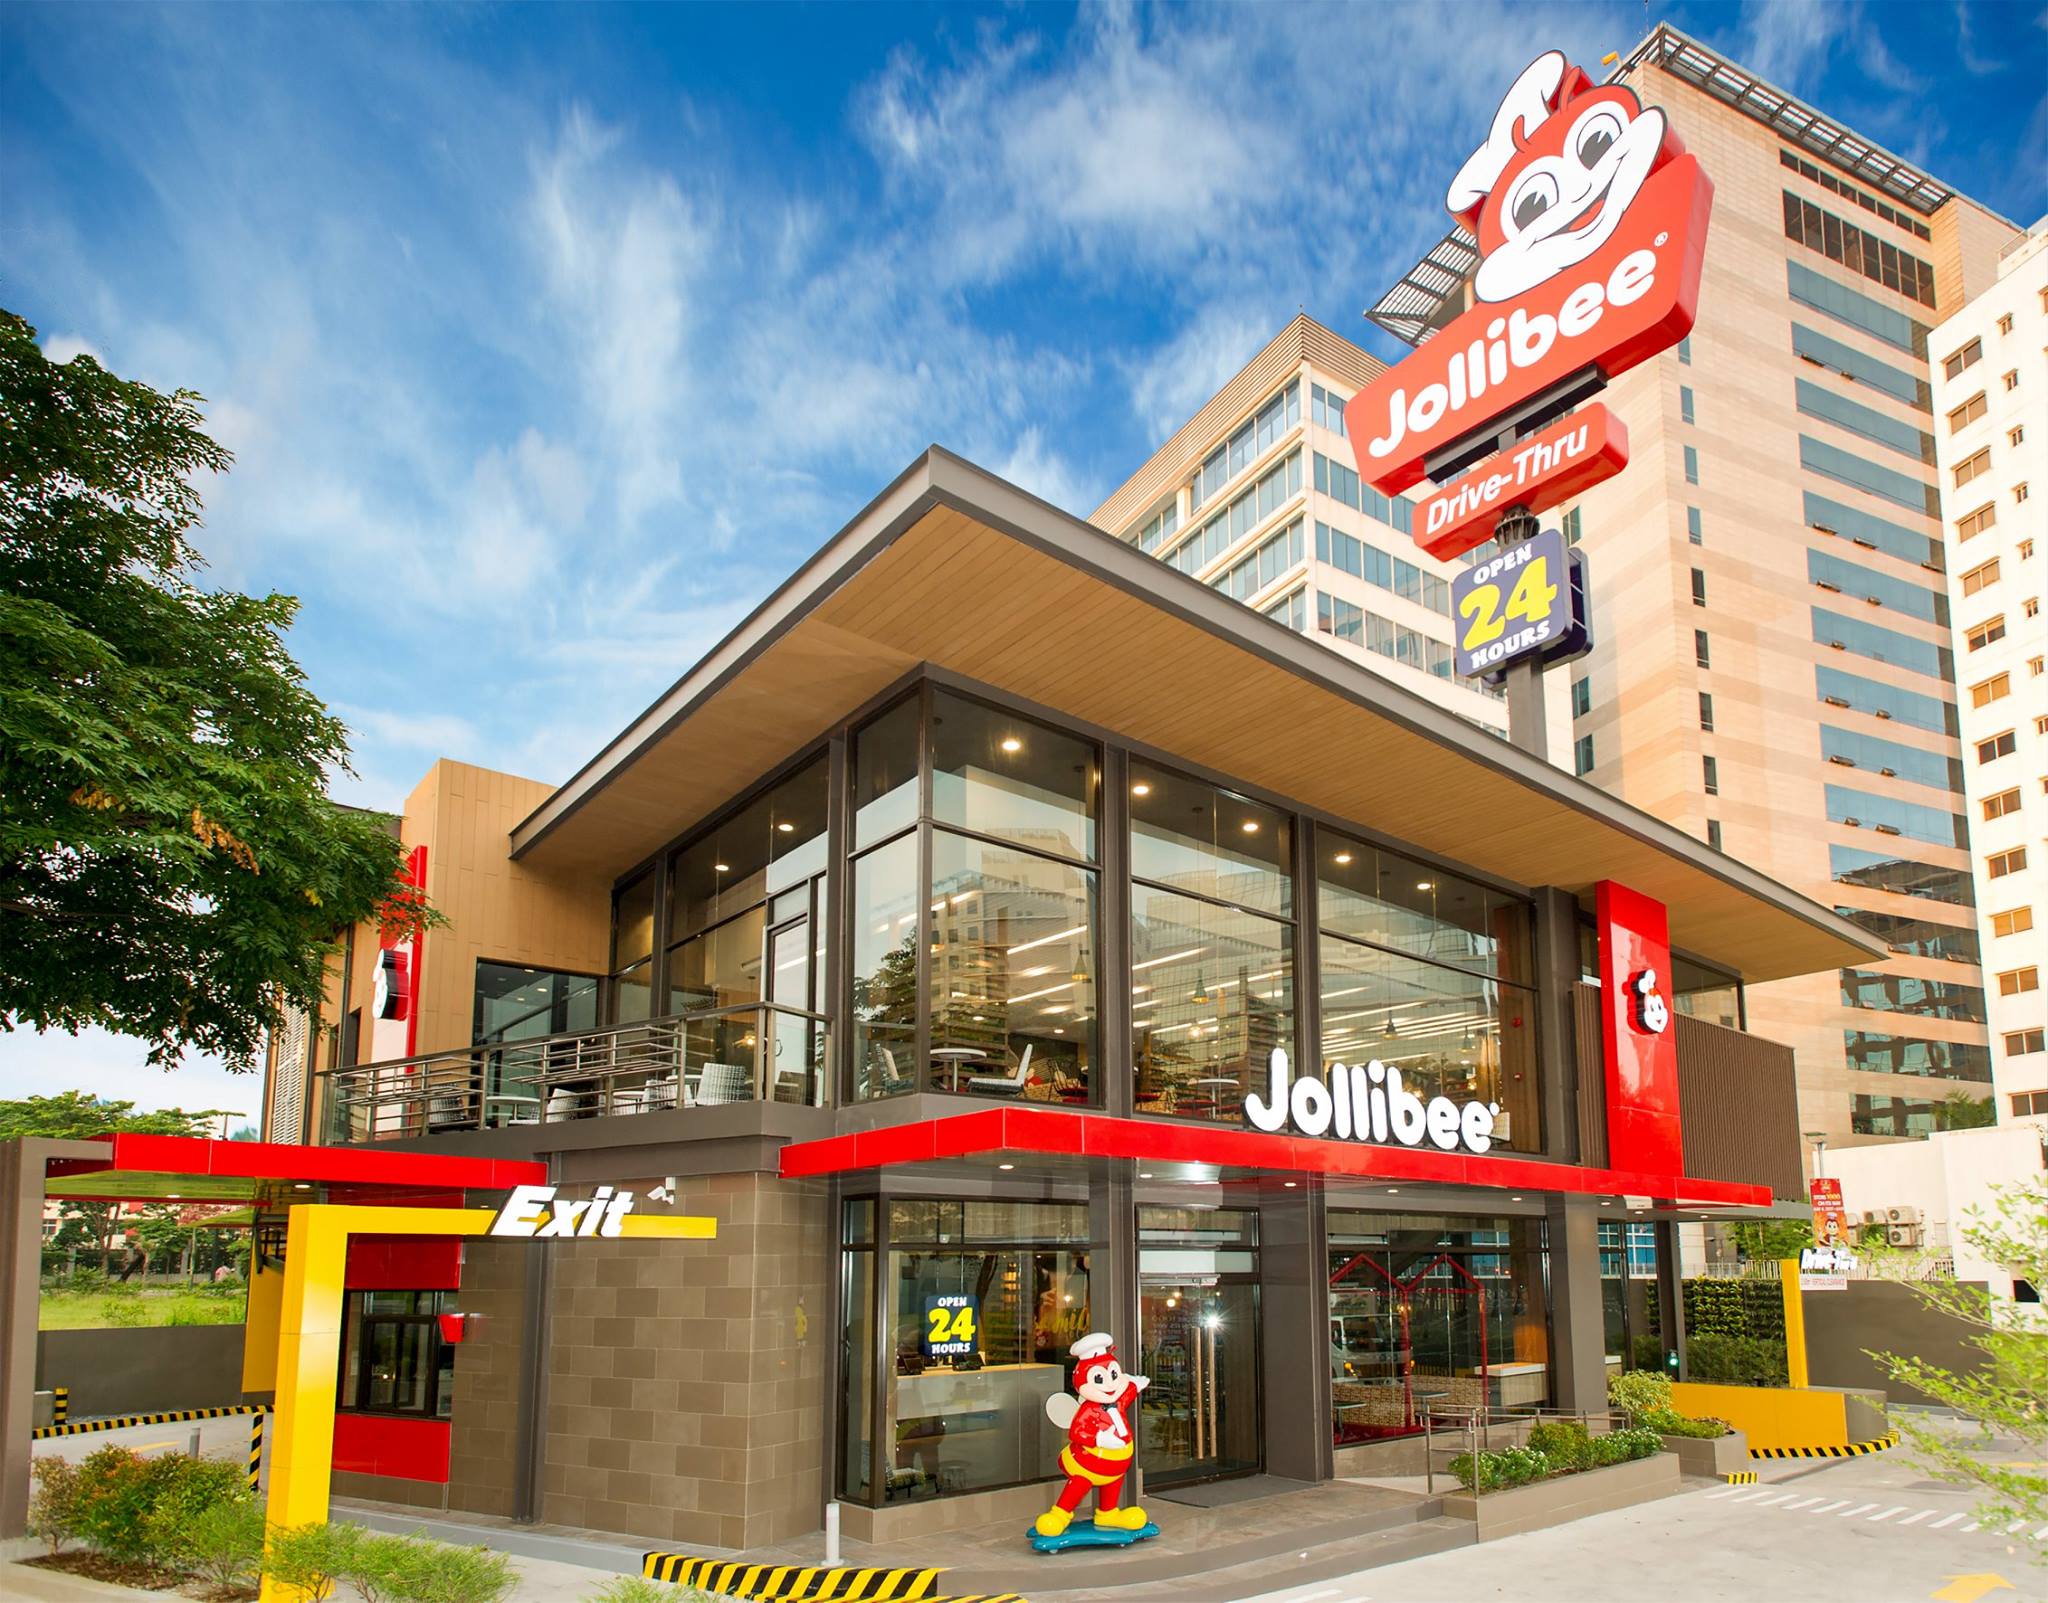 Chinese-owned businesses in the Philippines - Jollibee